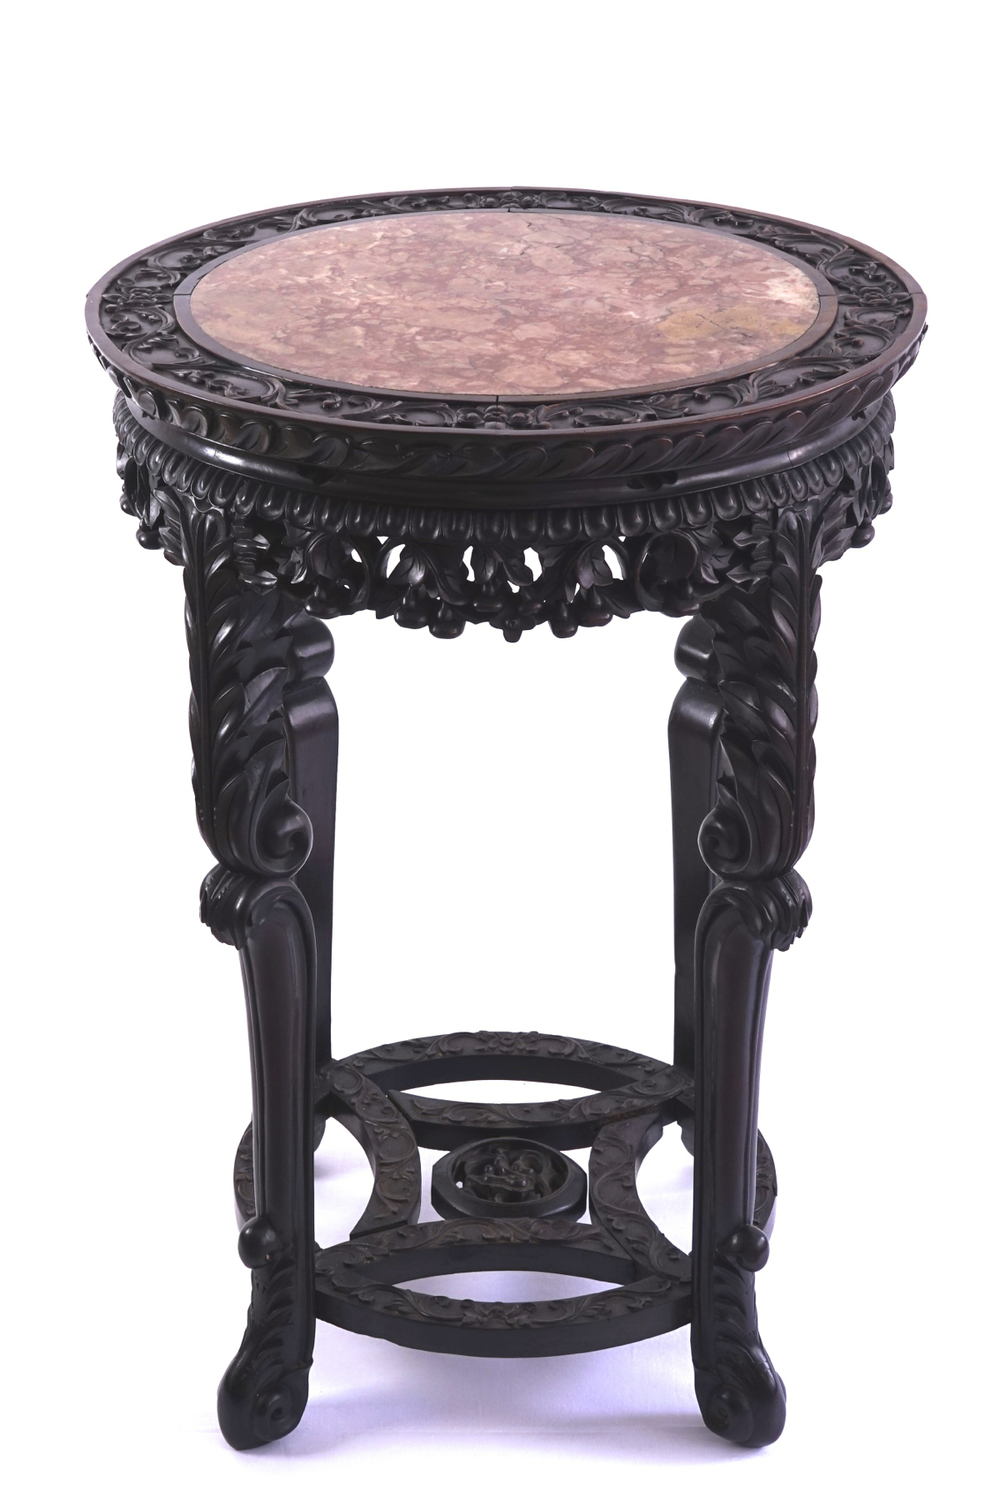 A Chinese carved wood and marble round vase stand